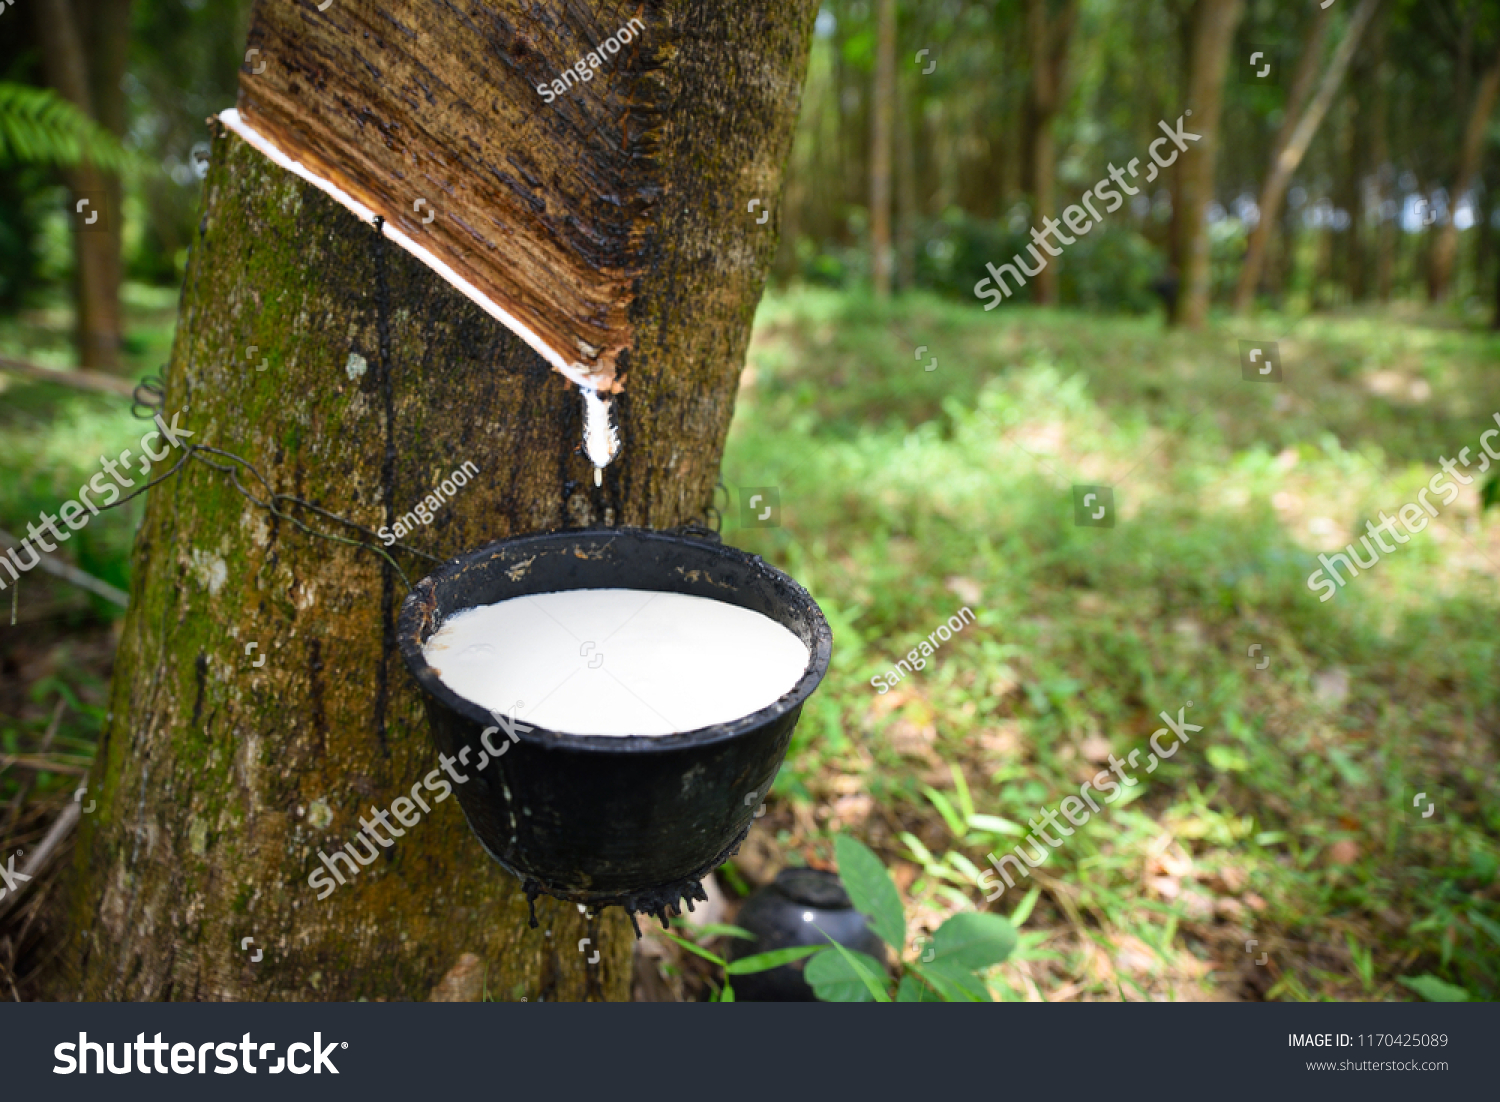 Close up Natural rubber latex trapped from rubber tree, Latex of rubber flows into a bowl #1170425089